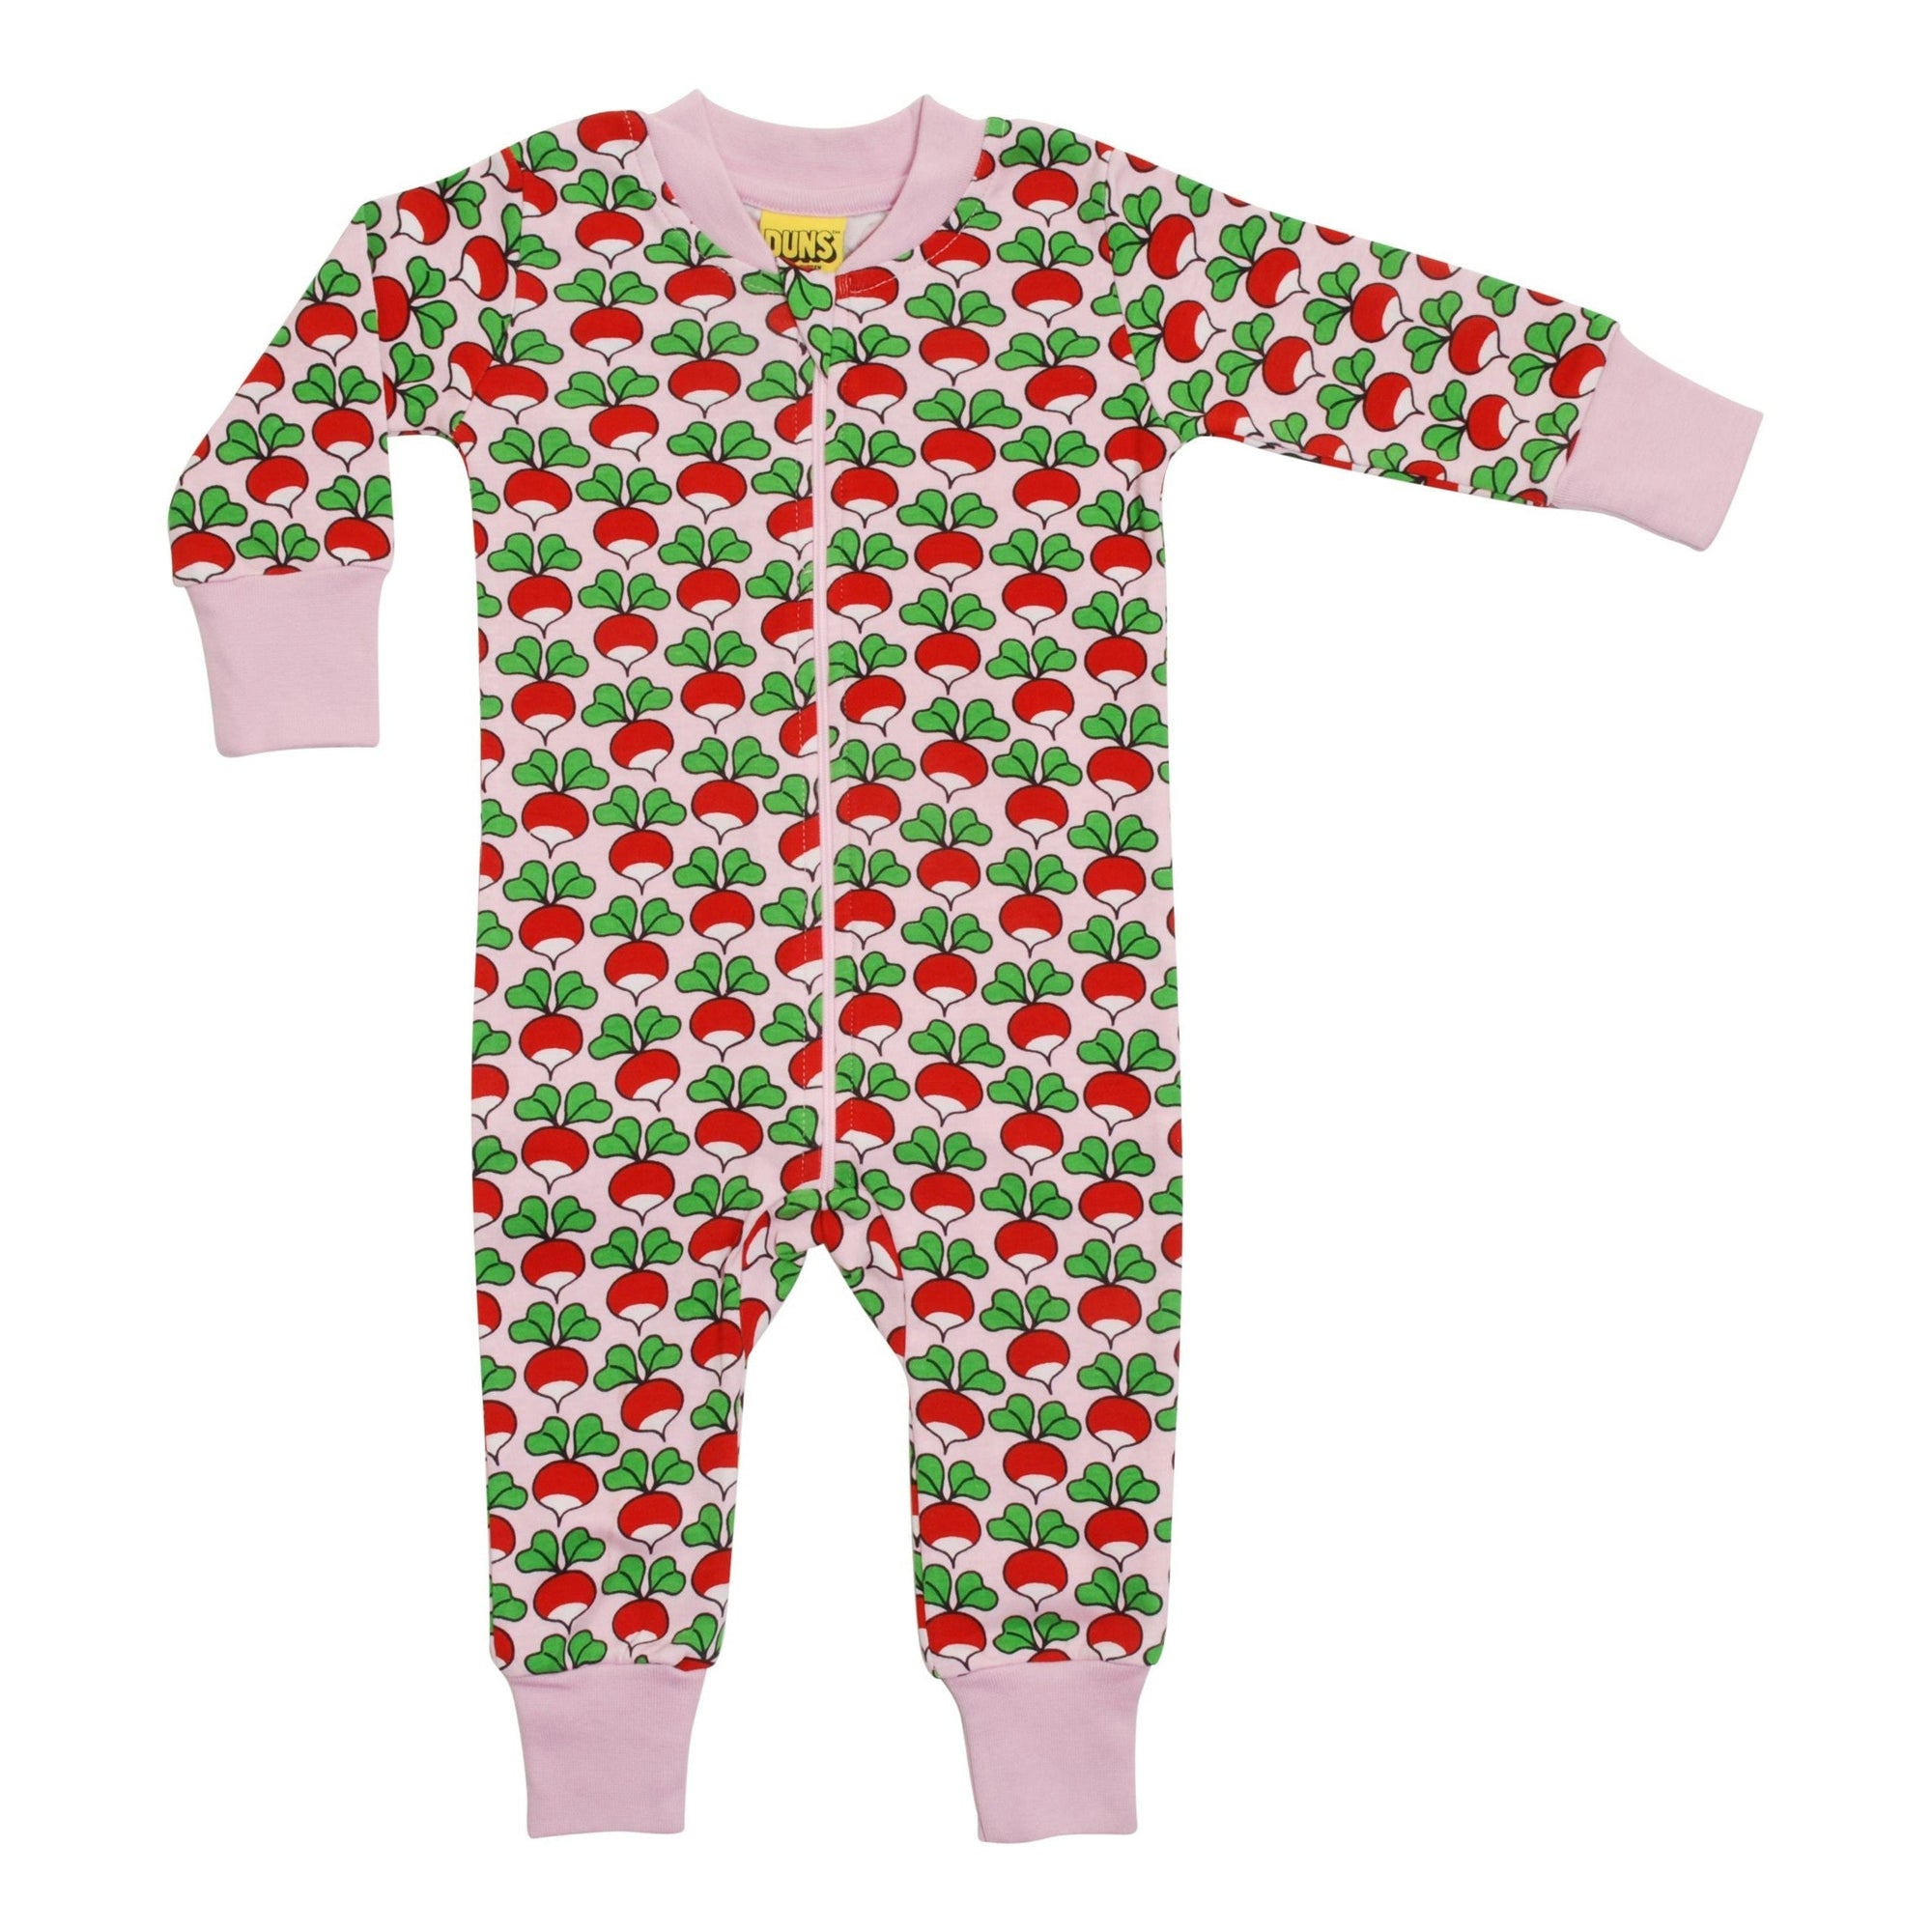 Radish - Orchid Pink Zippersuit - 2 Left Size 2-4 months & 3-4 years-Duns Sweden-Modern Rascals